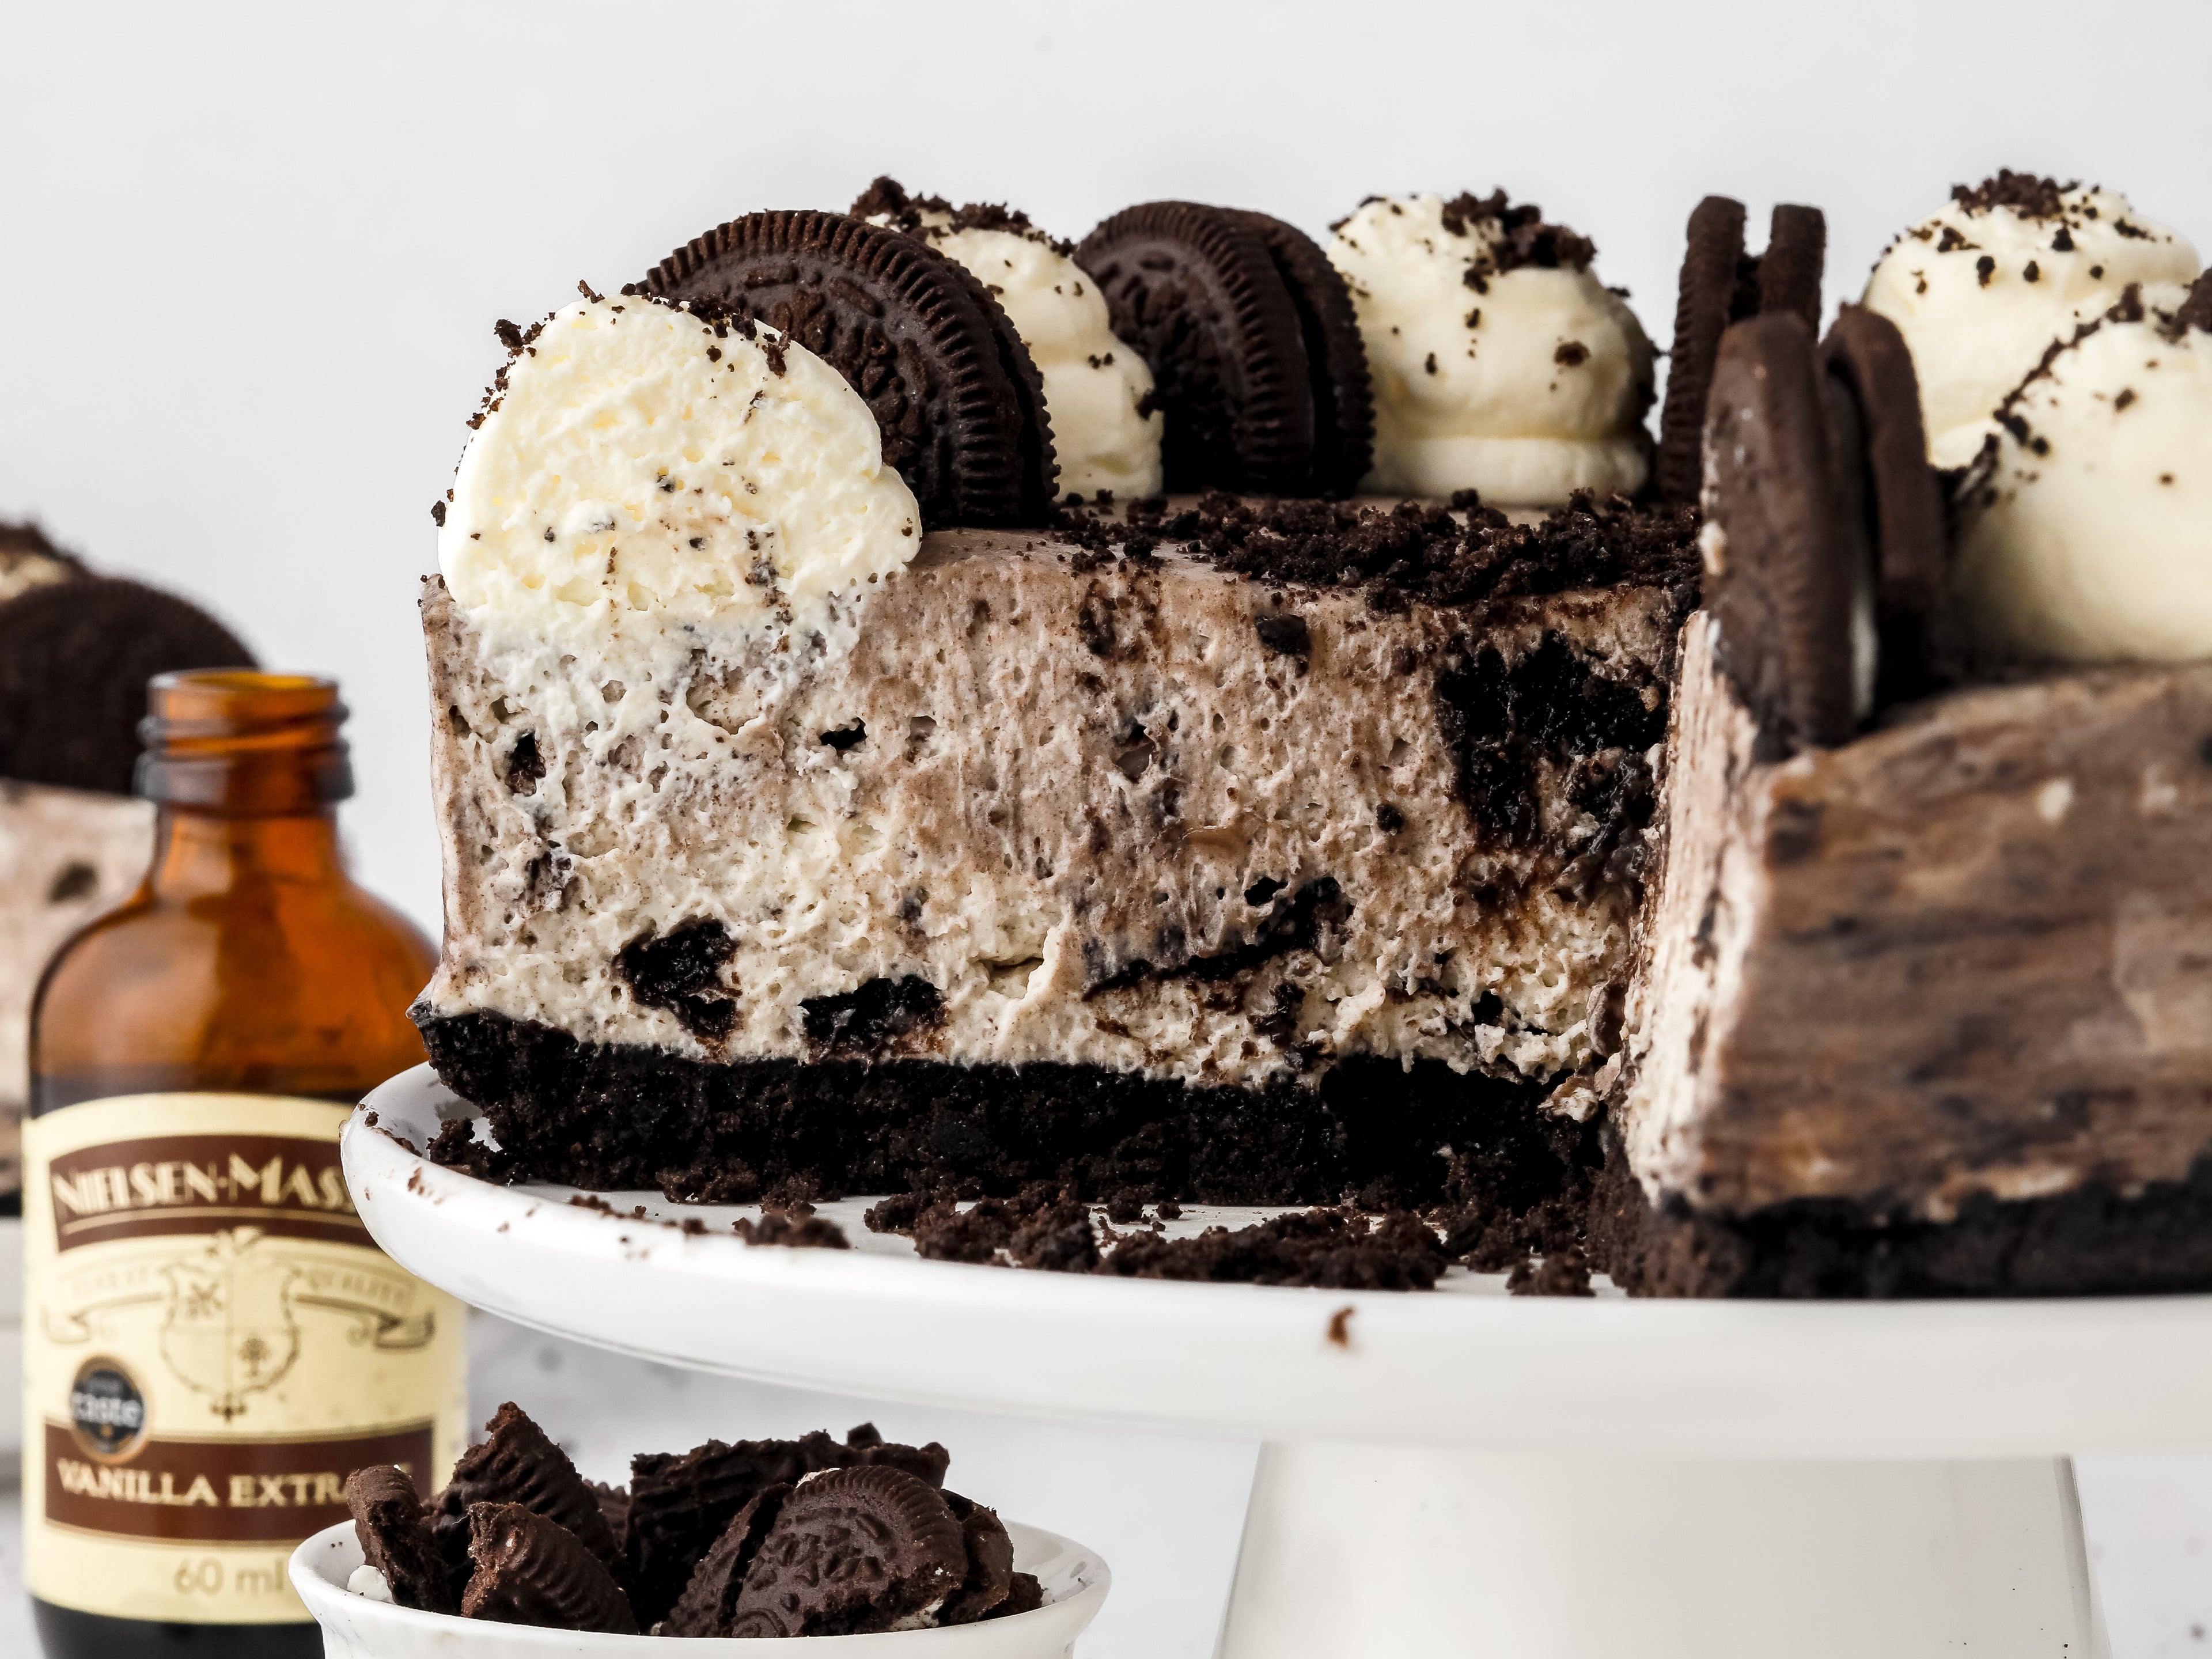 Oreo cheesecake on a cake stand with vanilla bottle beside it